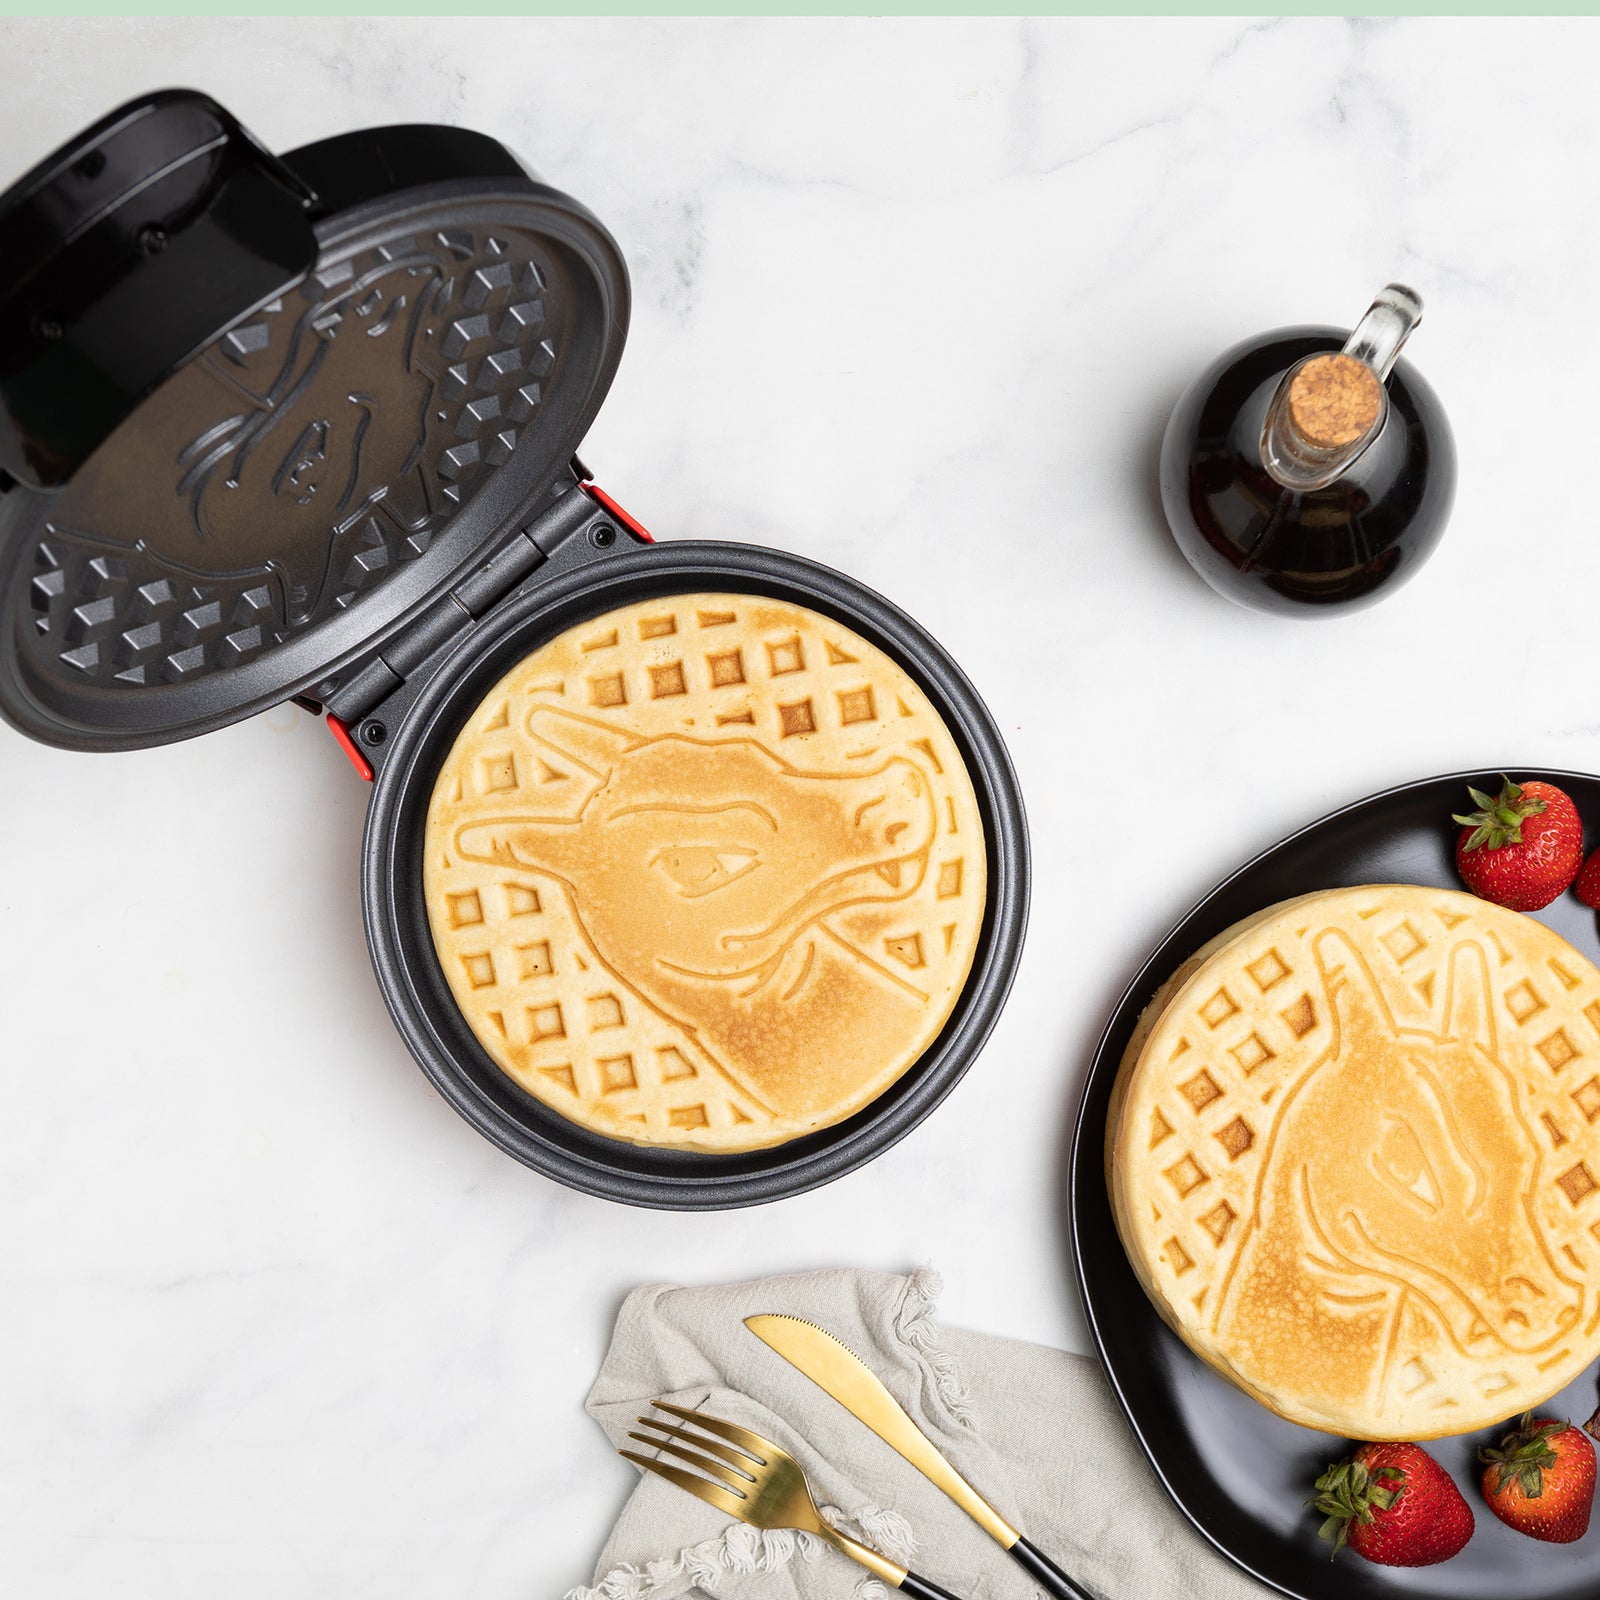 Uncanny Brands Minions Waffle Maker - Non-Stick Electric Waffle Iron Fun  Kitchen Appliance in Dave Yellow - Bed Bath & Beyond - 23513439